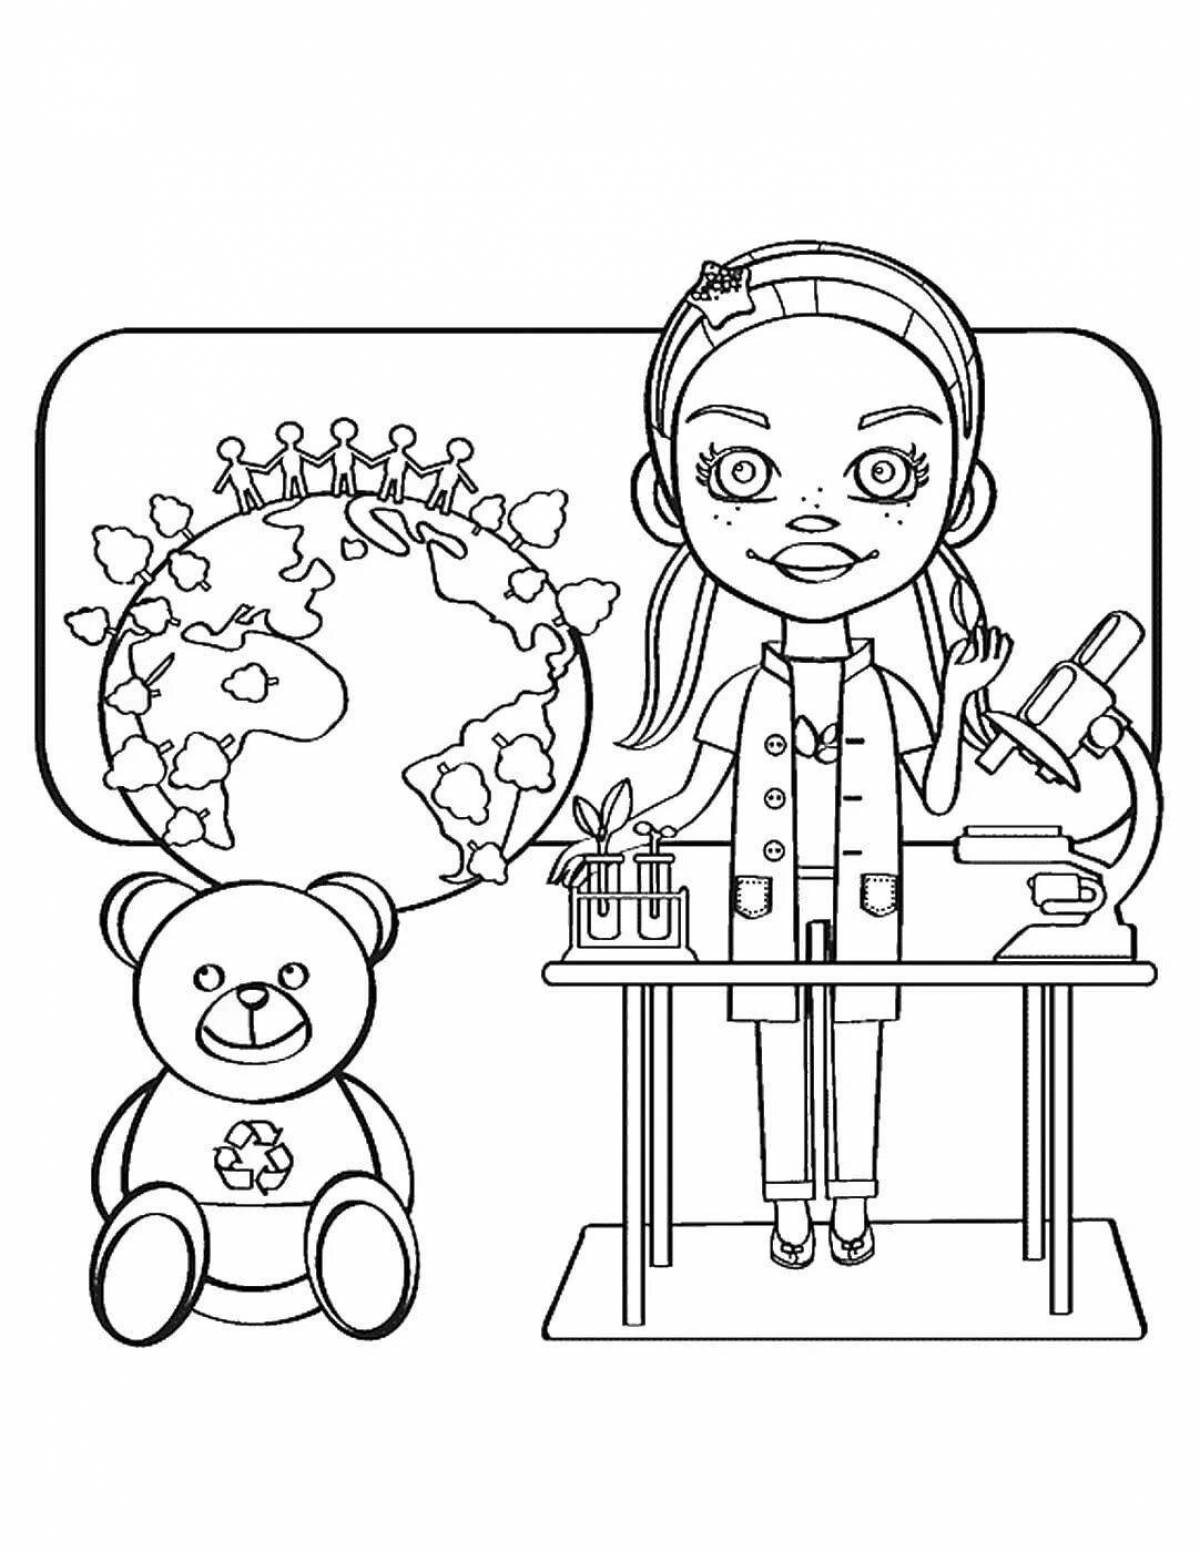 Coloring pages funny scientists for preschoolers